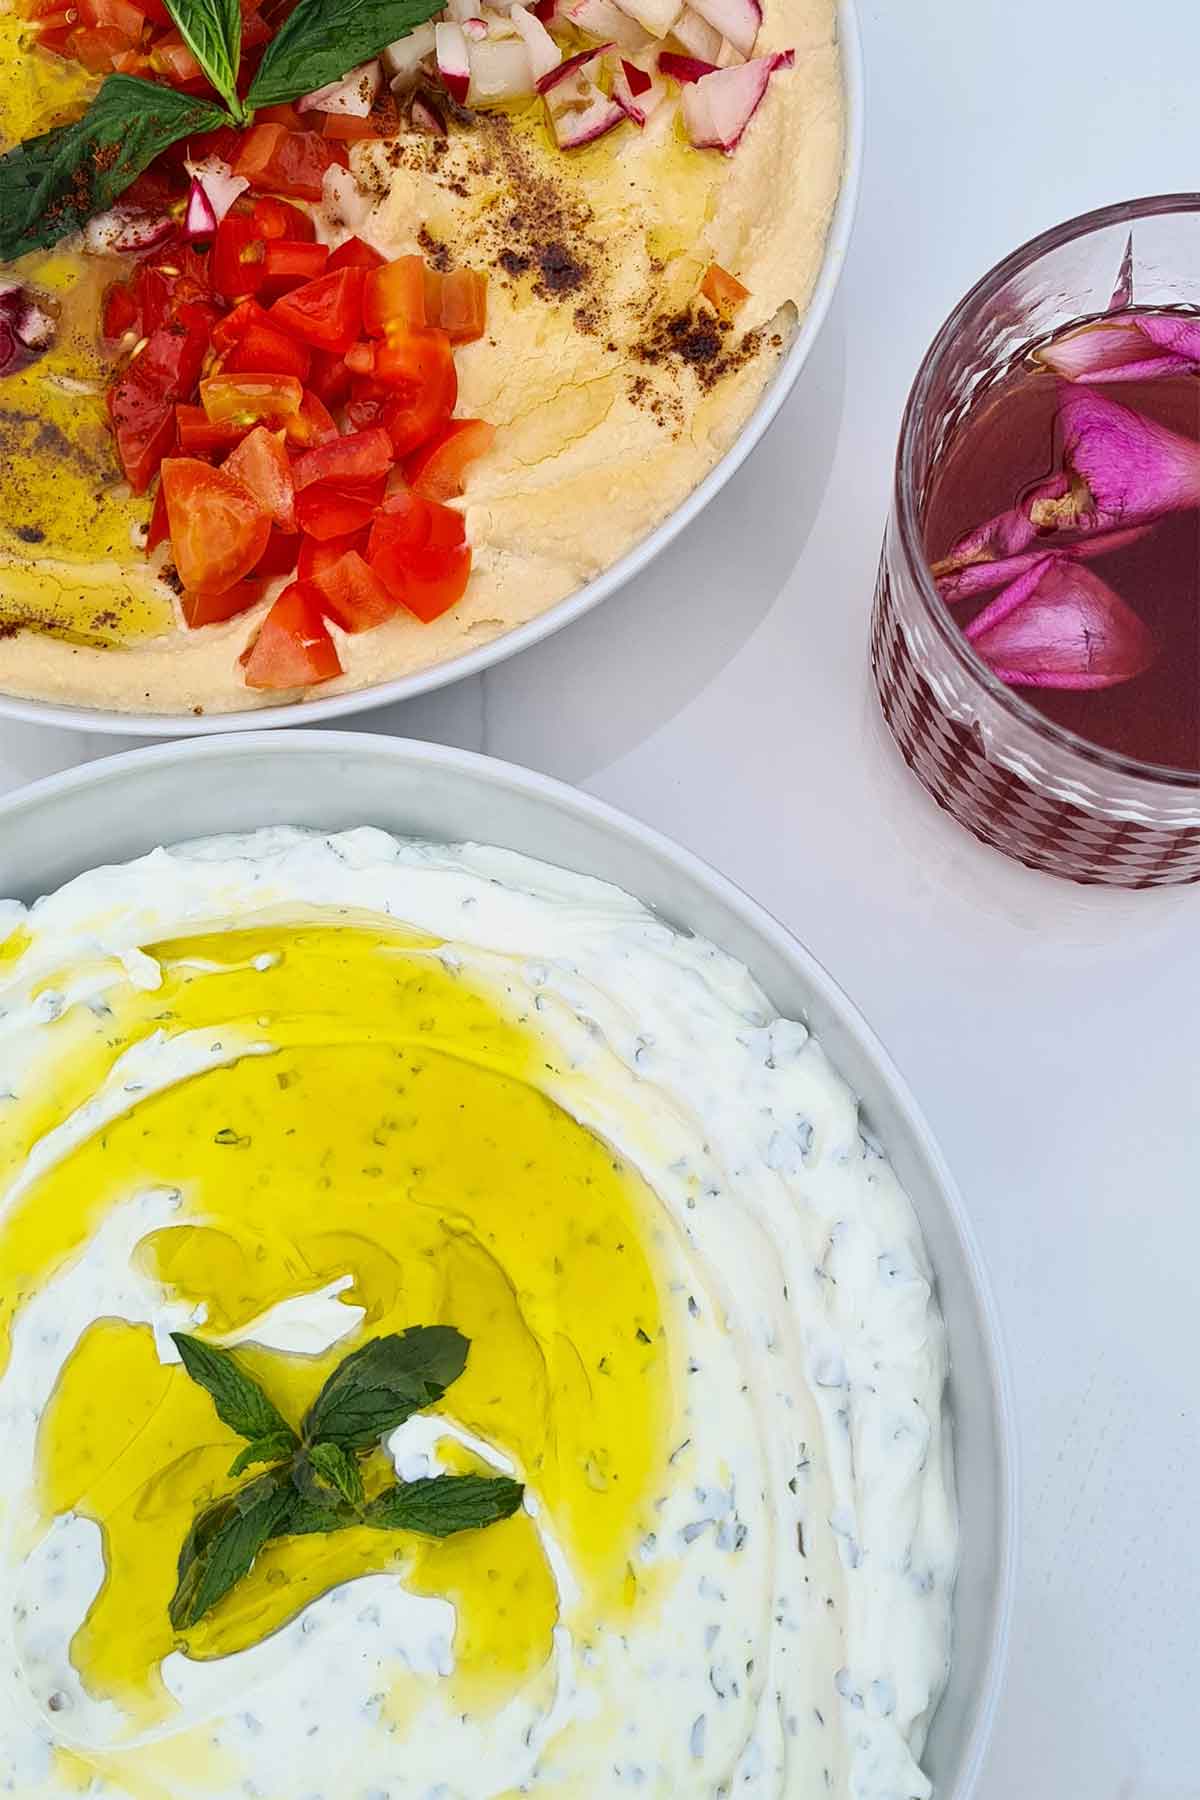 How to make labneh at home